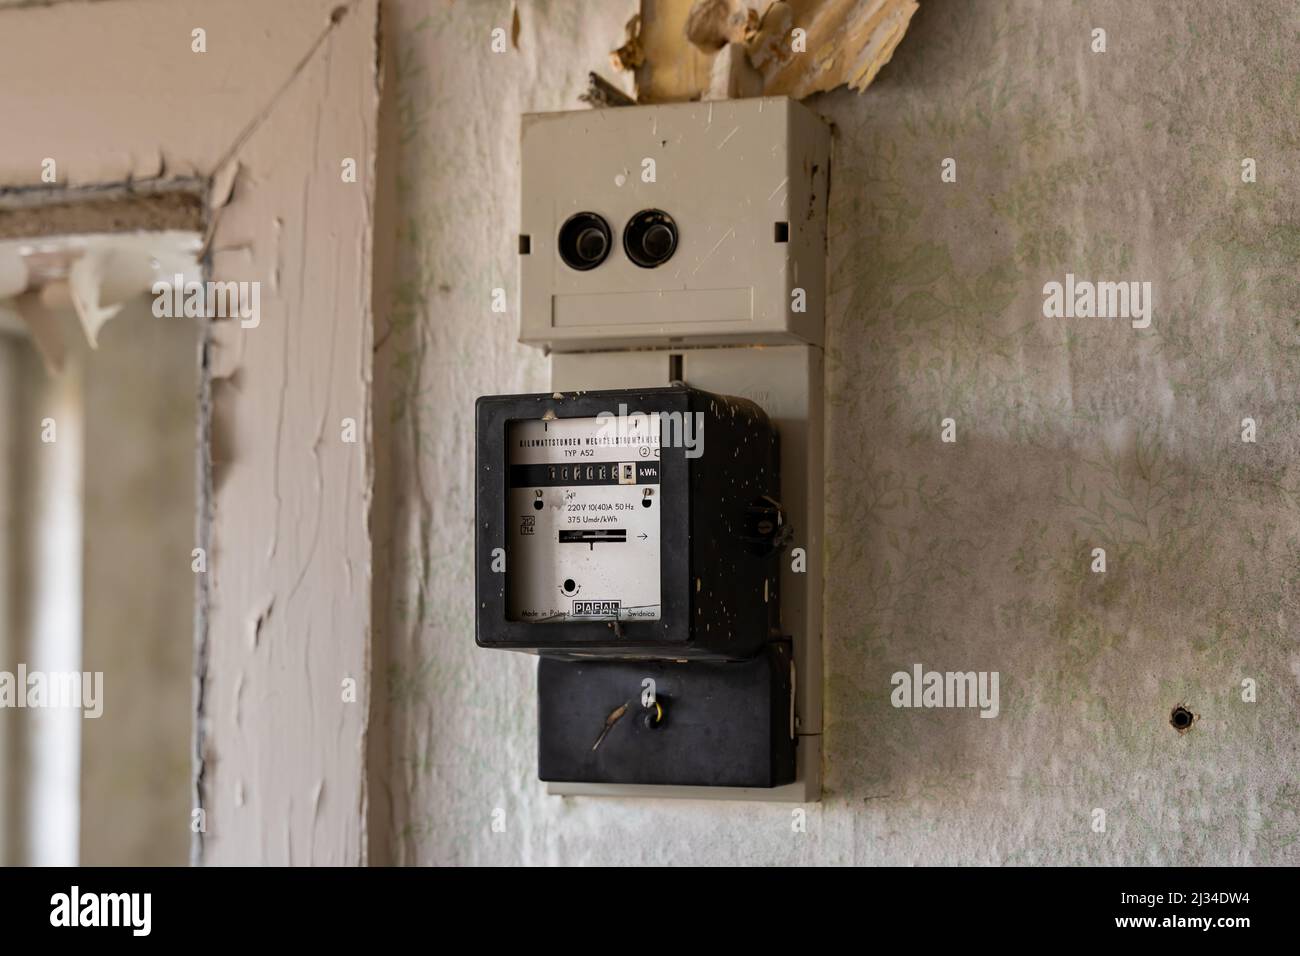 Old electric meter on a wall in an abandoned building. Electrical equipment to measure power consumption in a single room. Old vintage wallpaper Stock Photo